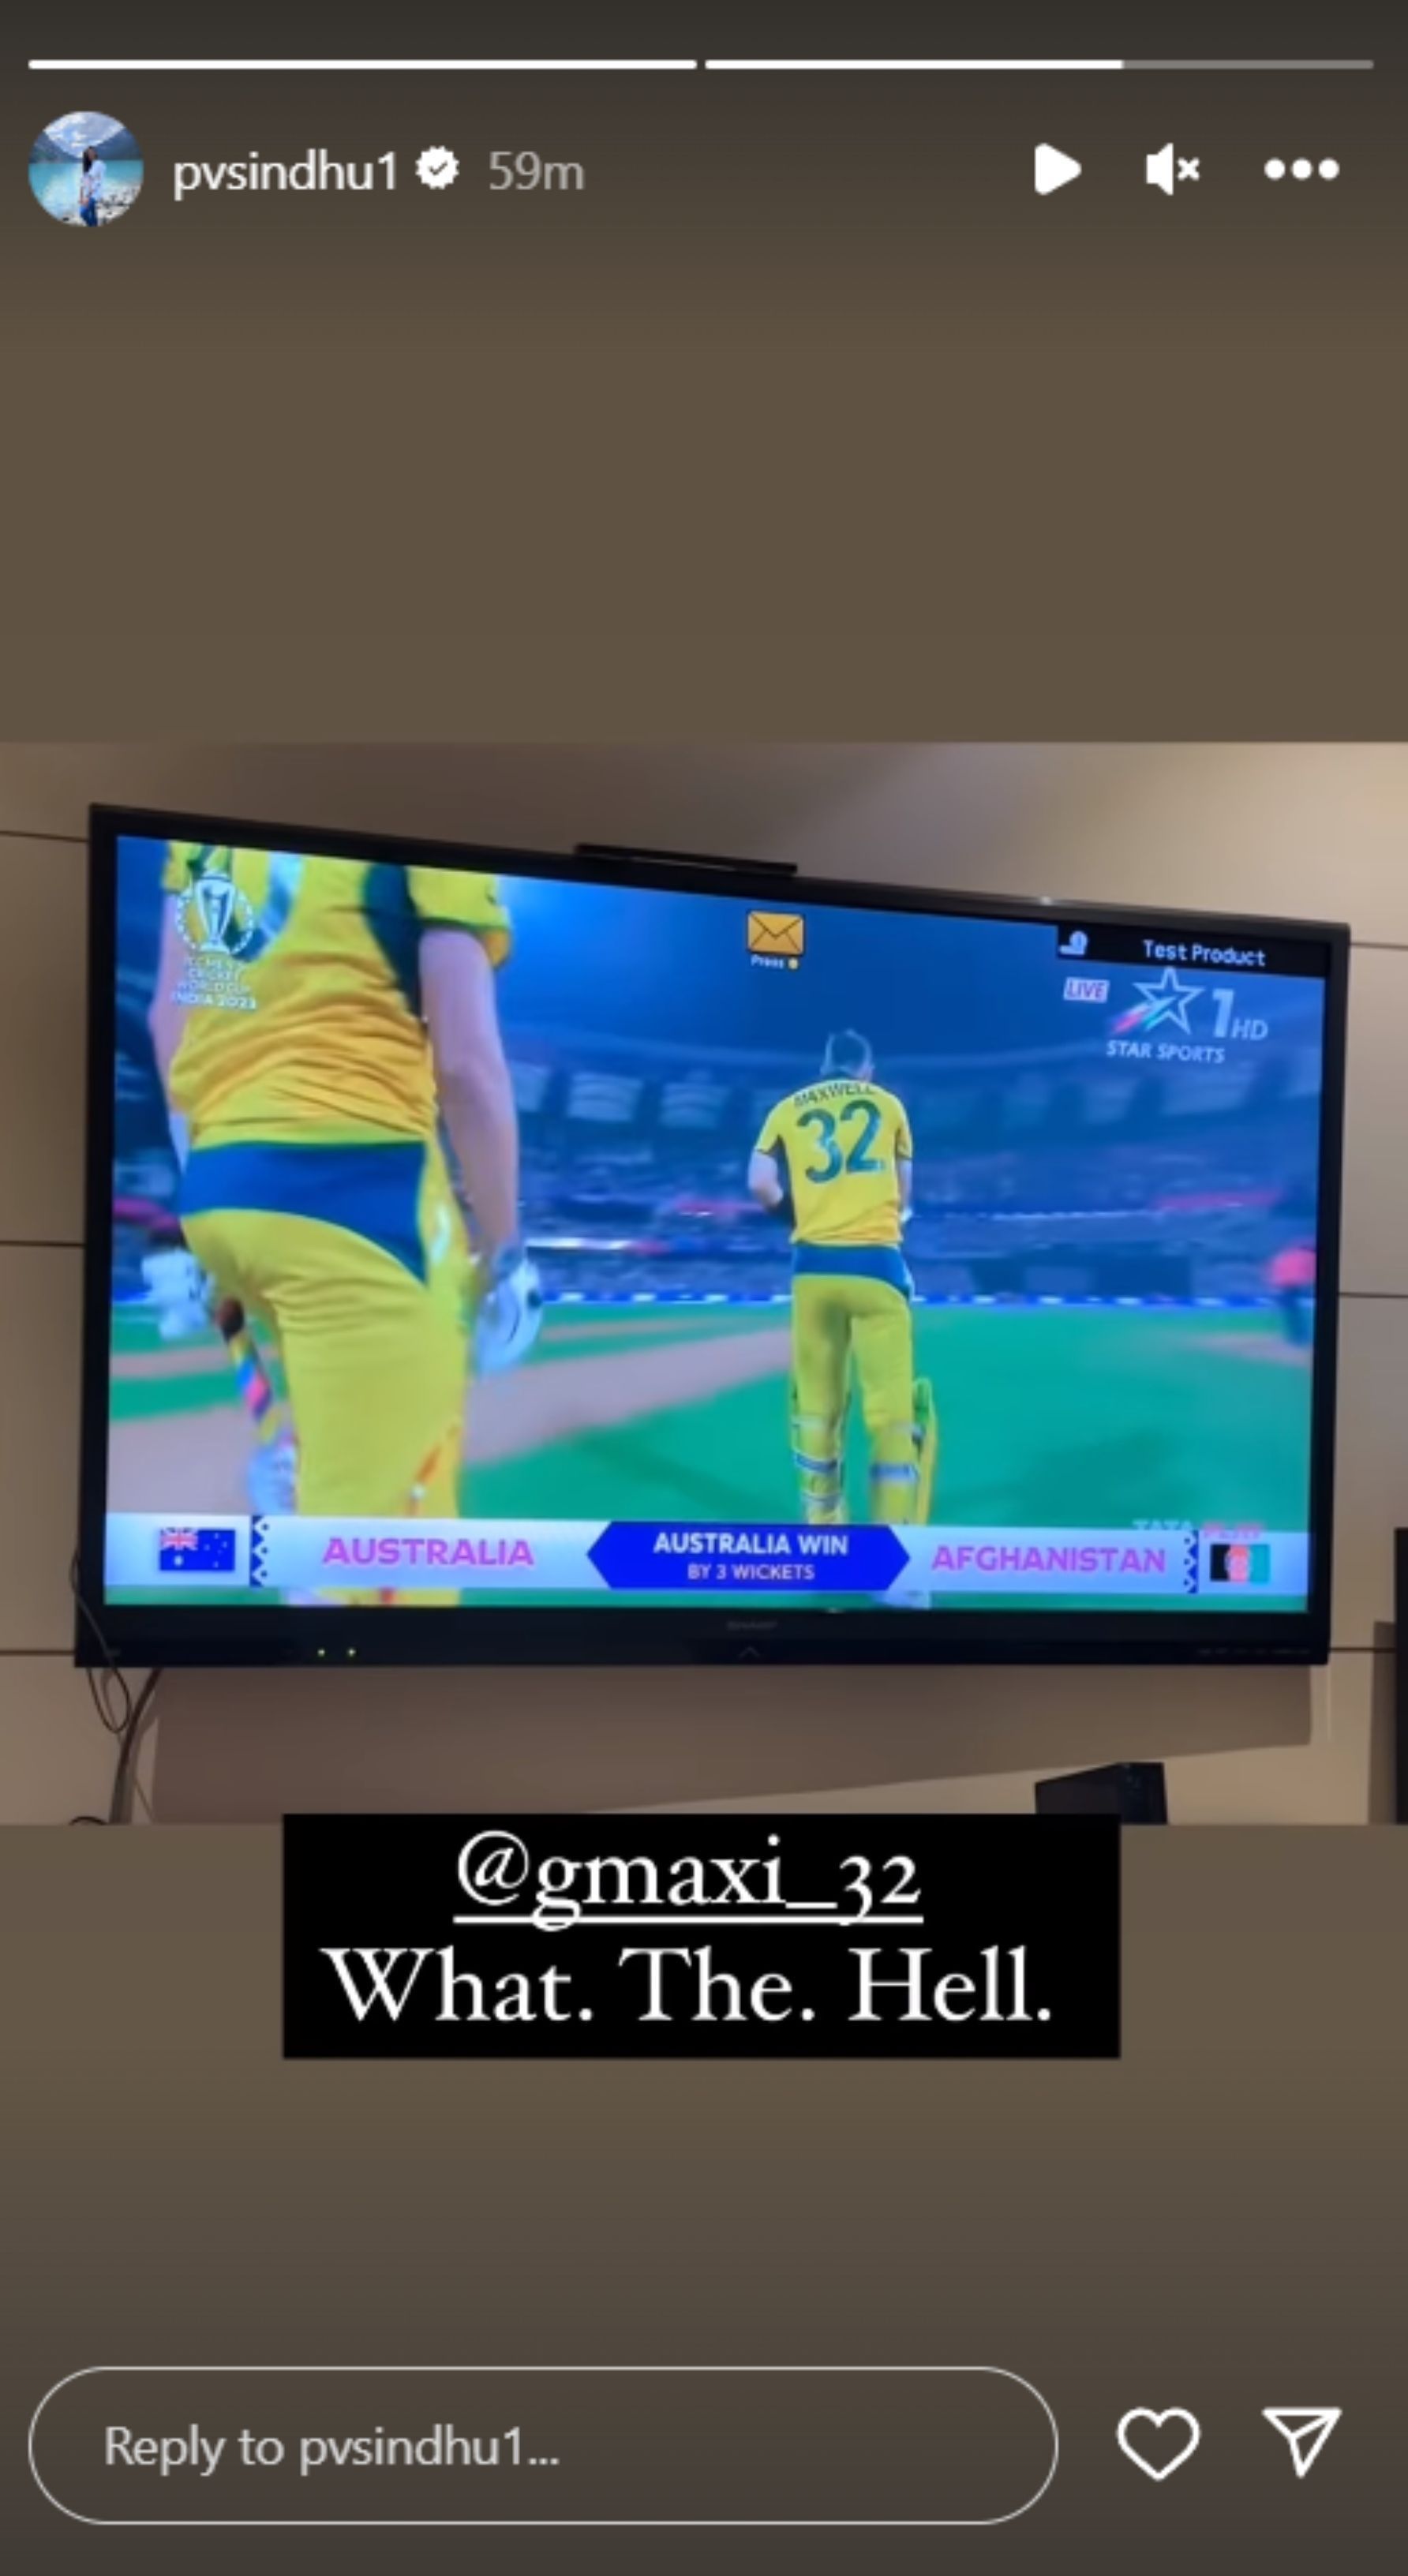 PV Sindhu&#039;s Instagram story about Glenn Maxwell after his match-winning double-century against Afghanistan on Tuesday.